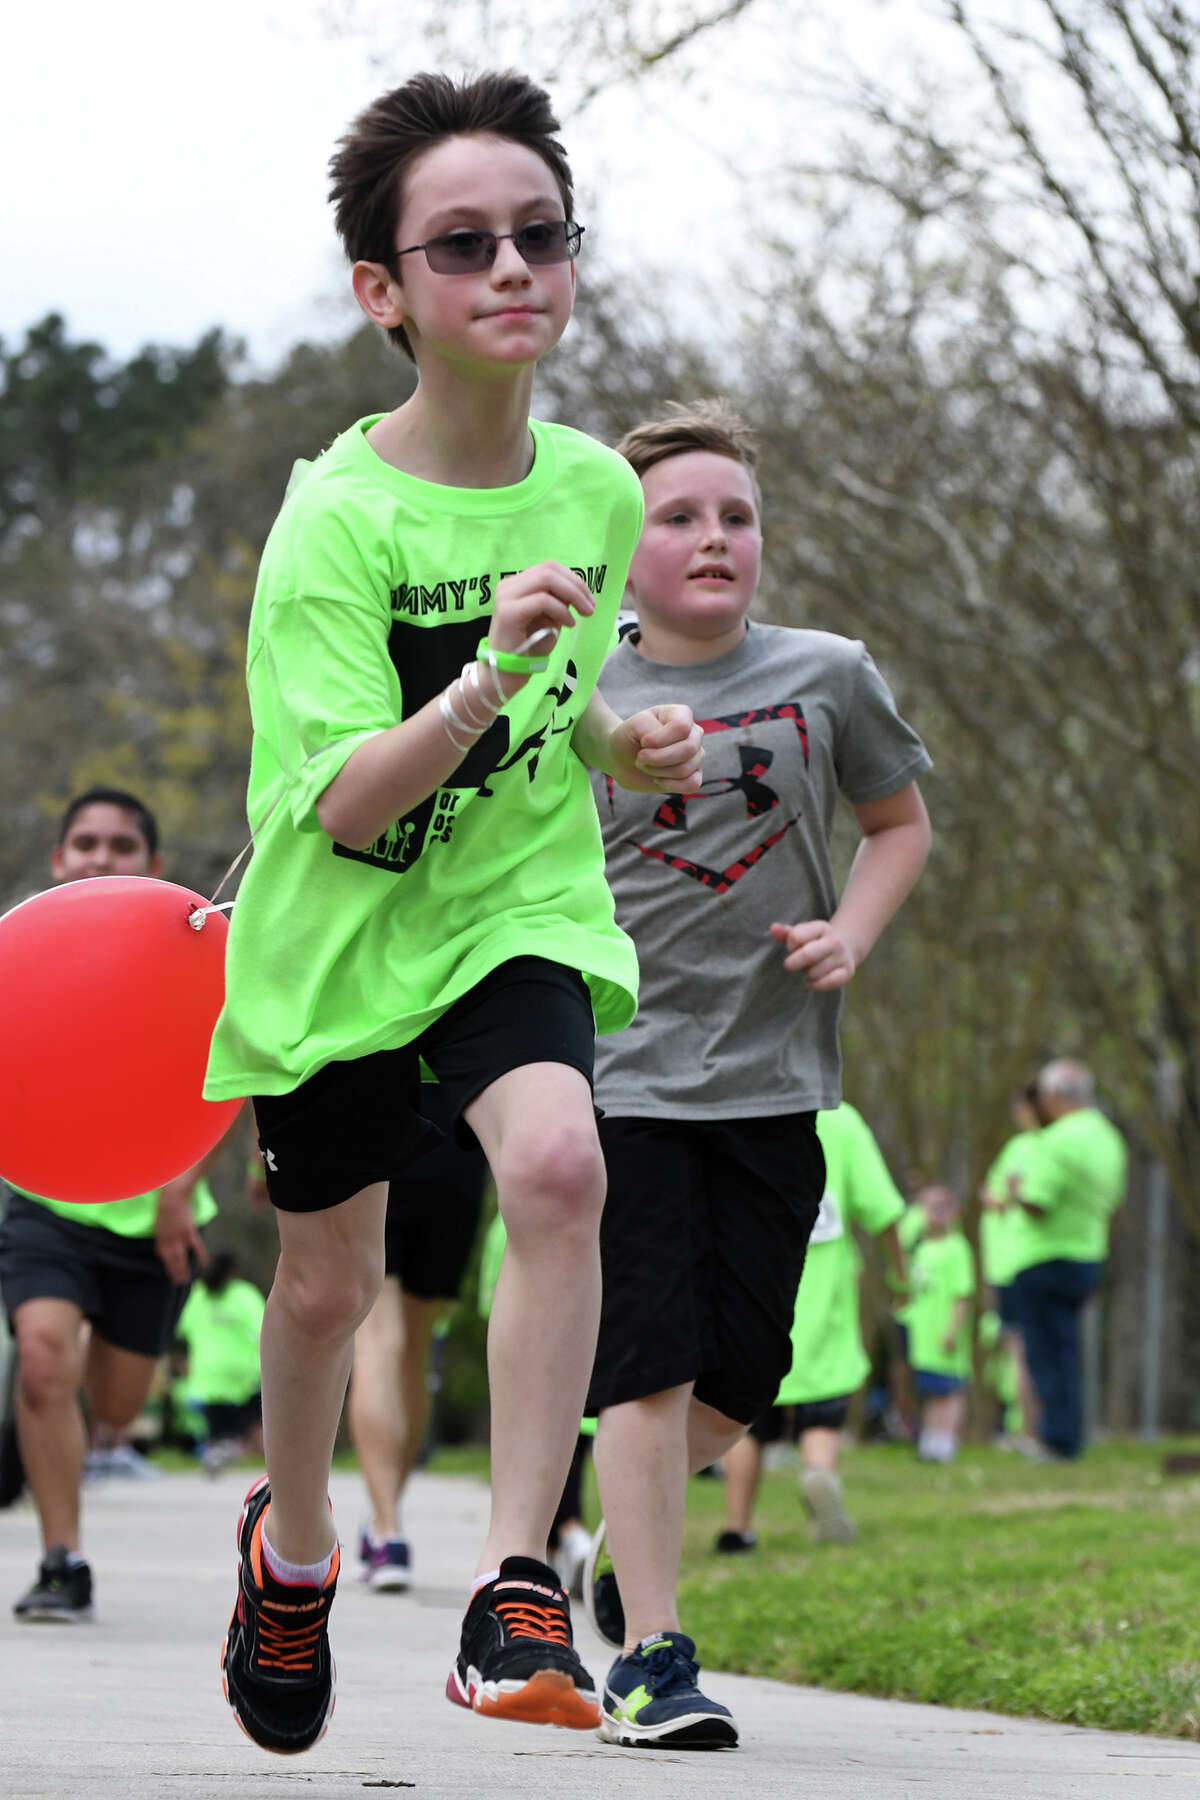 Timmy Schultz, 8, left (holding balloon), runs ahead of Ben Branch 3rd grade classmate Ethan Simms, 8 1/2, right, as they push to the finsih line during the annual "Timmy's Adoption Fun Run" at Kingwood United Methodist Church on March 4, 2018. (Photo by Jerry Baker/Freelance)